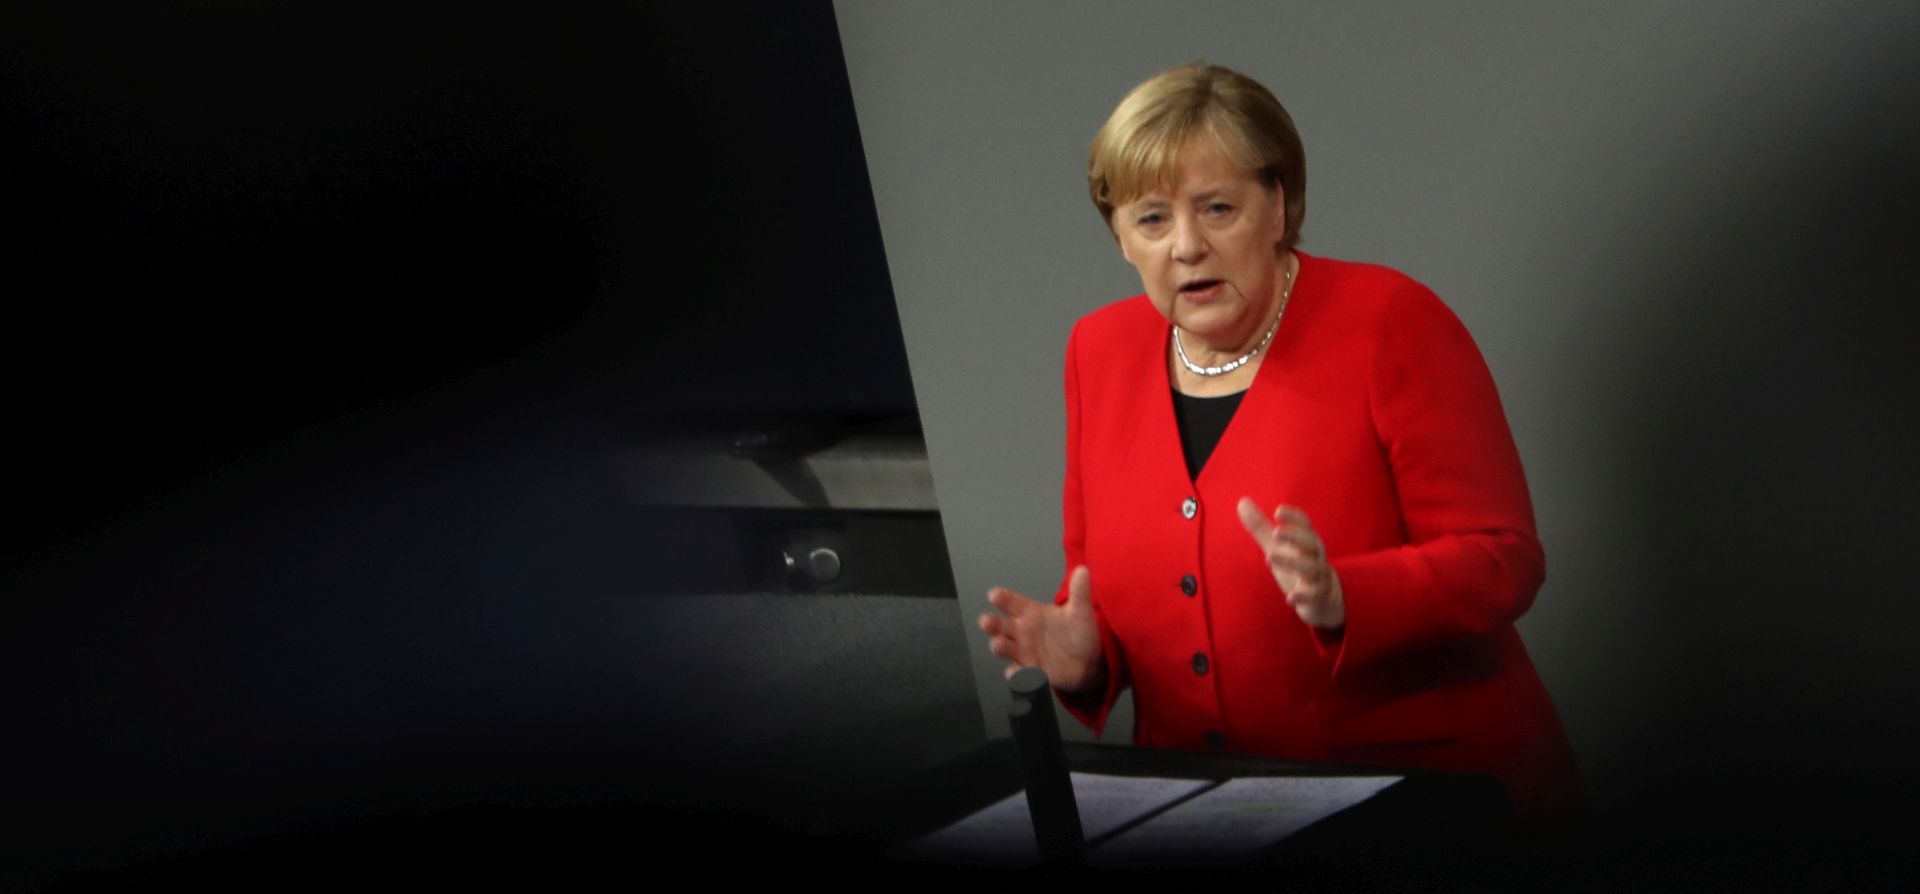 epa08028234 German Chancellor Angela Merkel speaks during a session of the 'Bundestag' German parliament in Berlin, Germany, 27 November 2019. Members of Bundestag will gather to debate on government policy.  EPA/HAYOUNG JEON